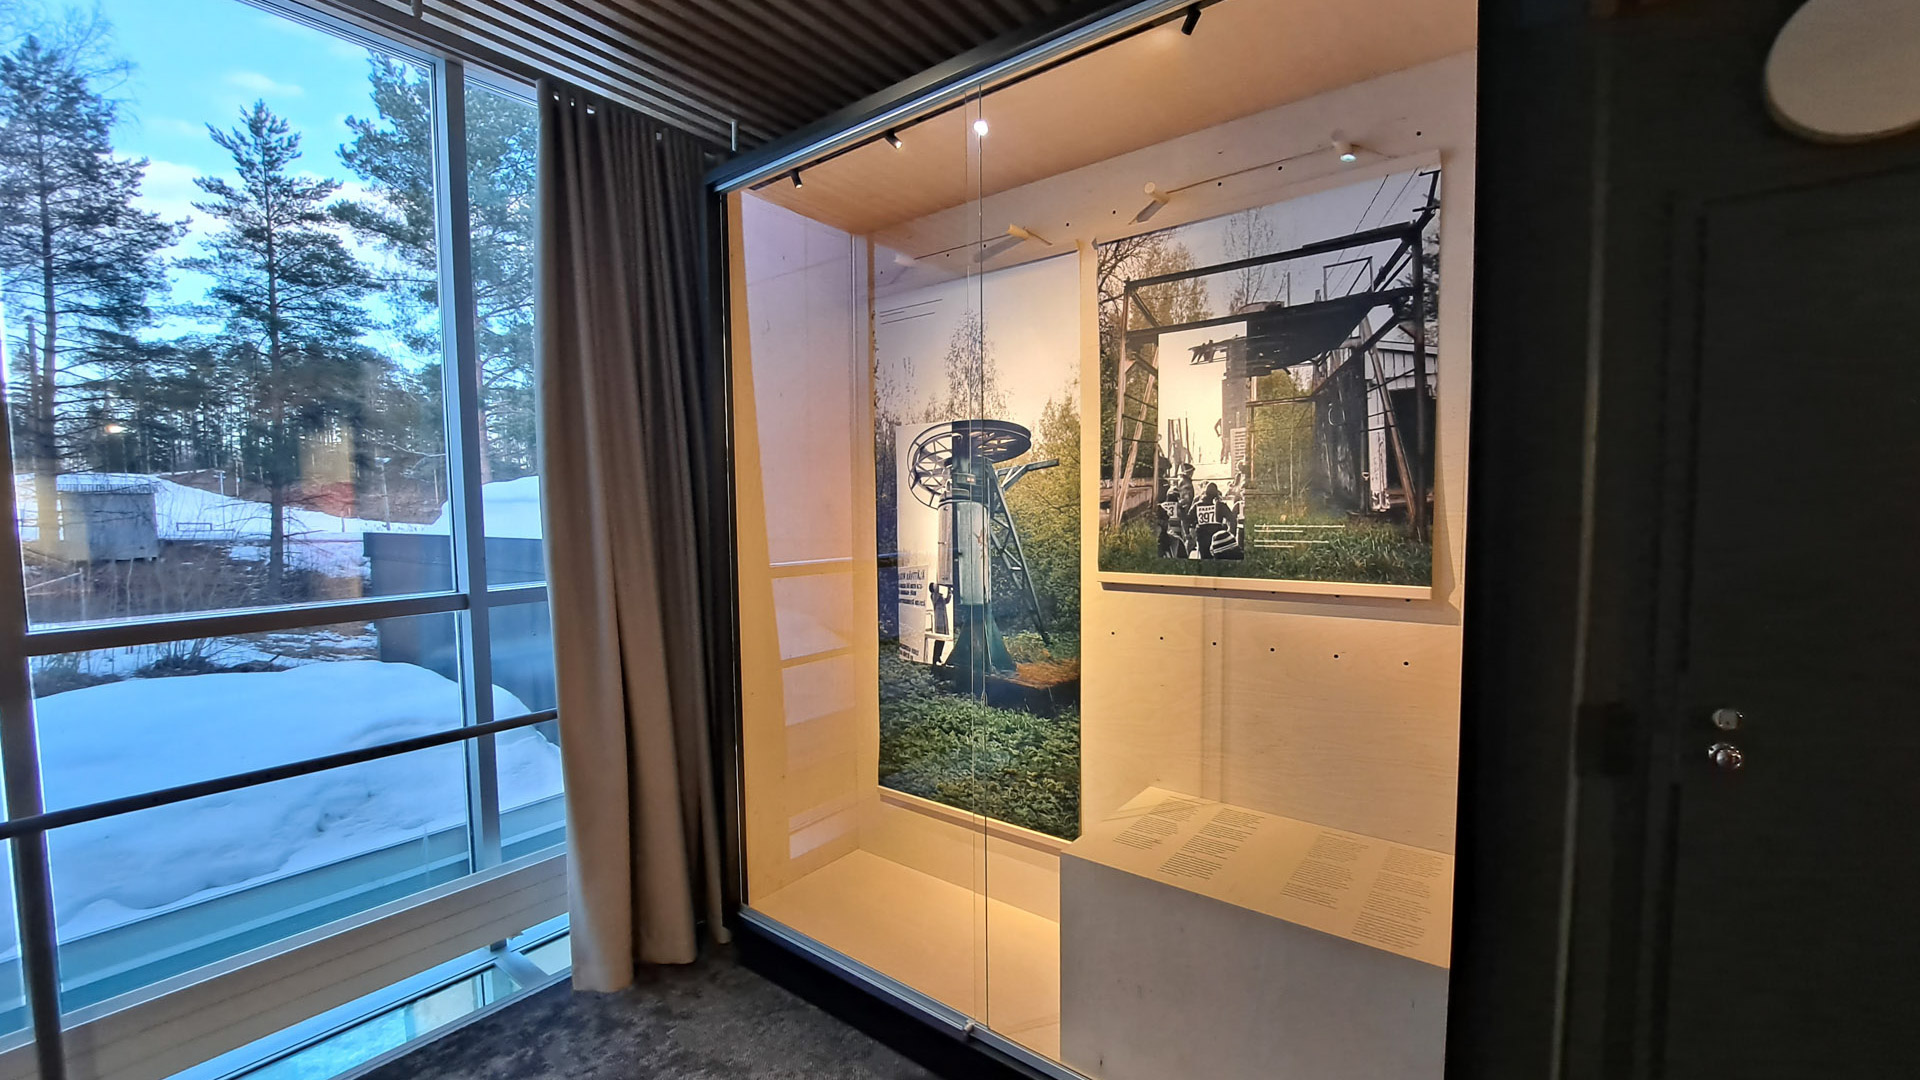 We built showcases to first celebrate the 100th year anniversary of the Lahti Ski Club and then be used for later exhibitions in the future.